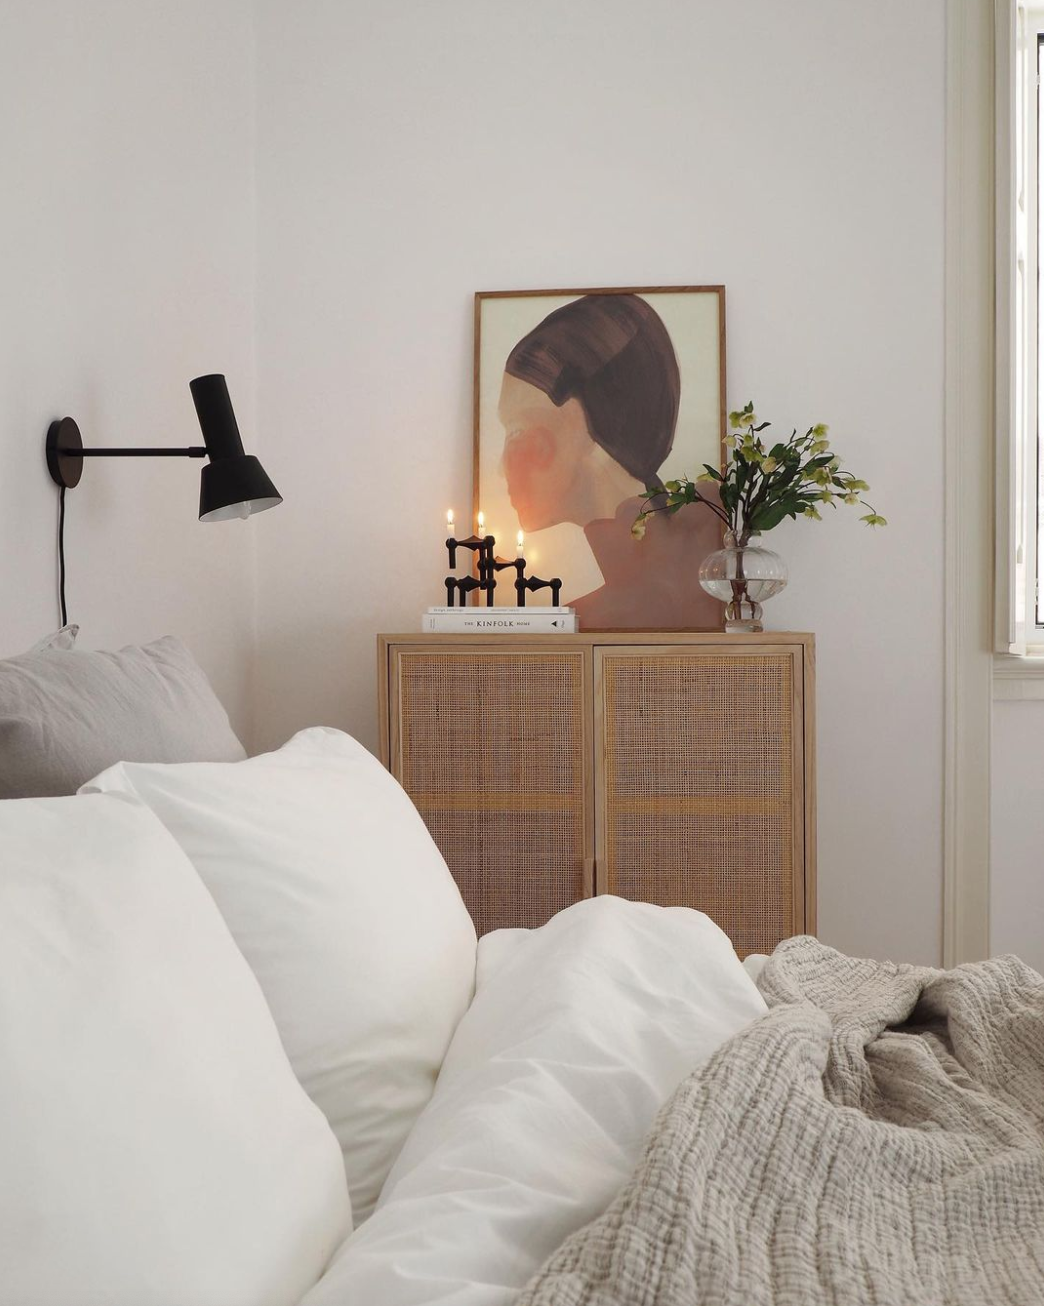 Light and airy Scandi style bedroom with artwork and candles